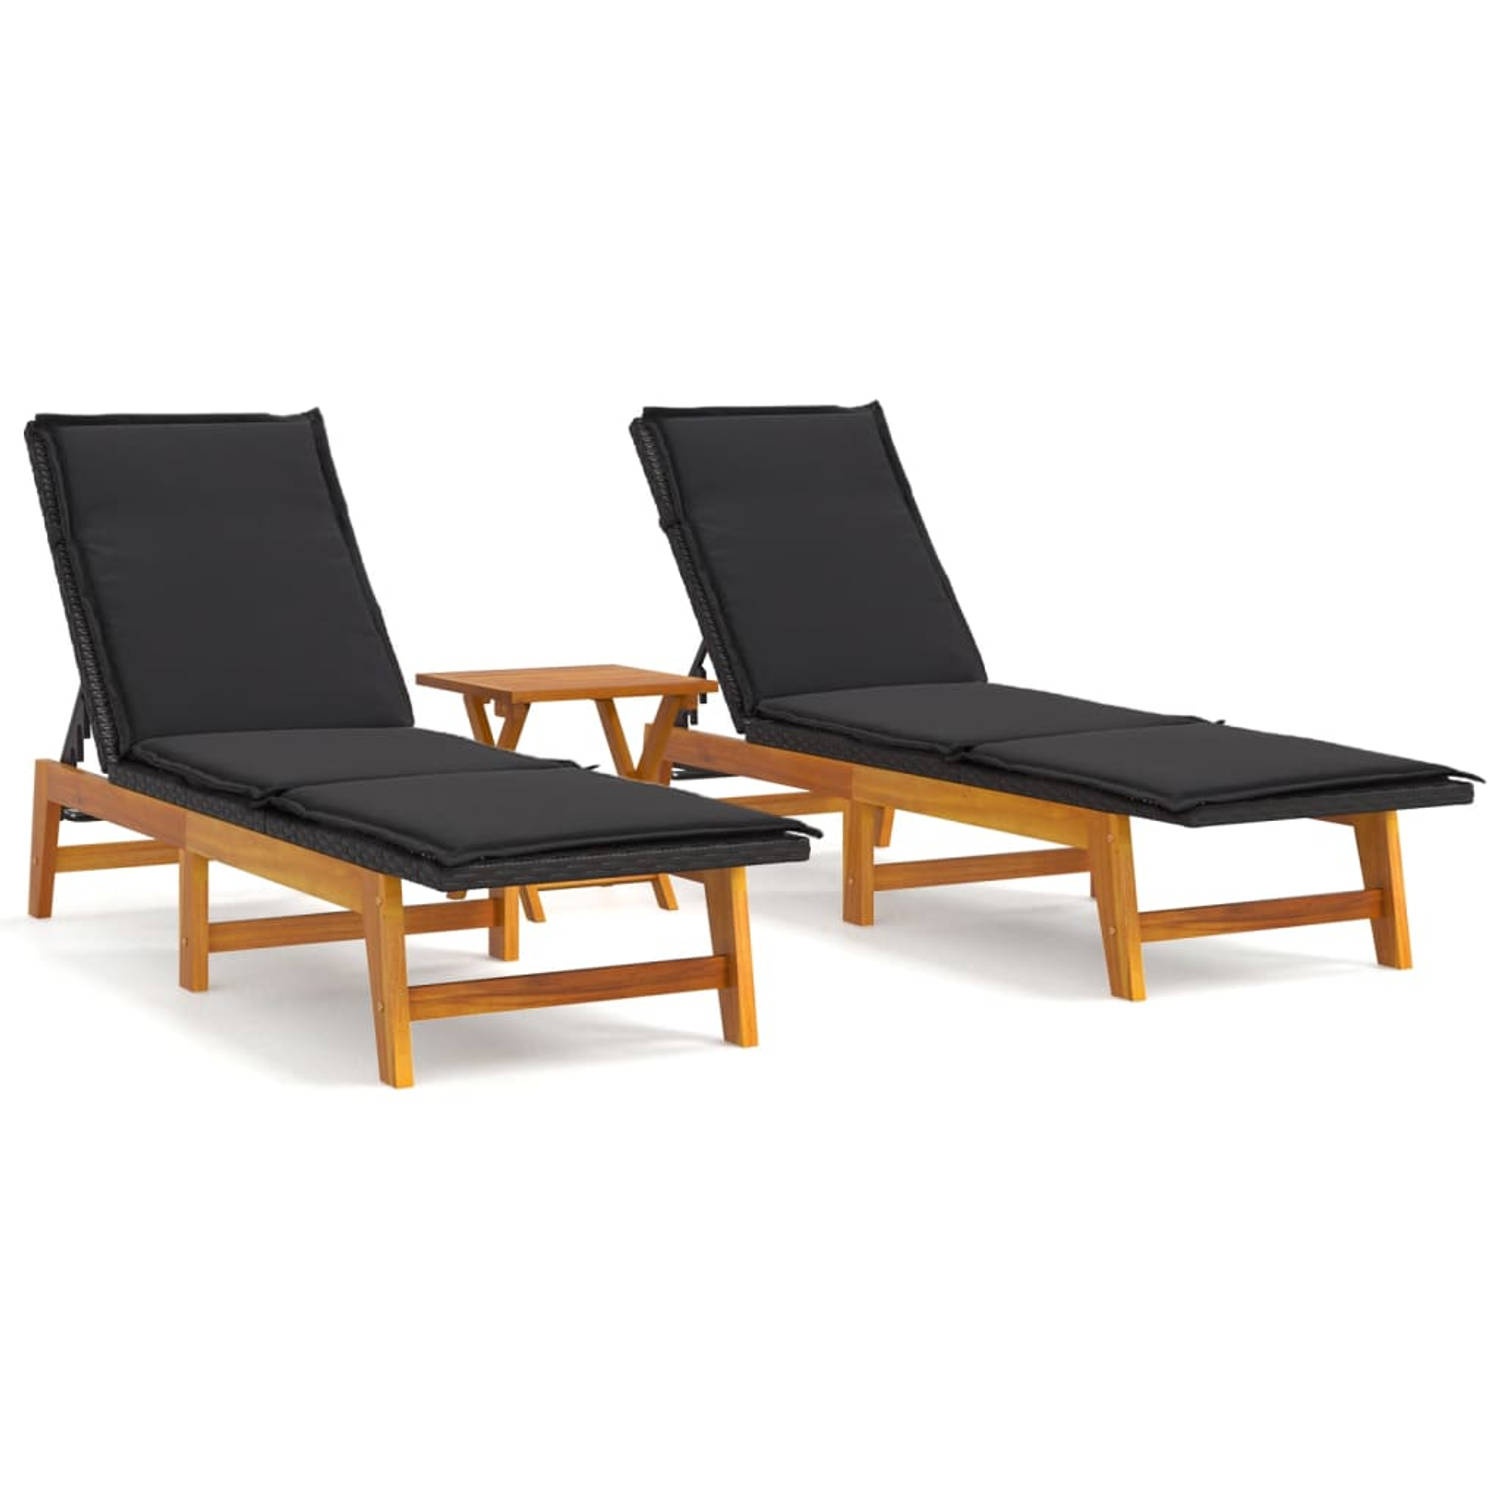 The Living Store 3-delige Loungeset poly rattan en massief acaciahout - Ligbed